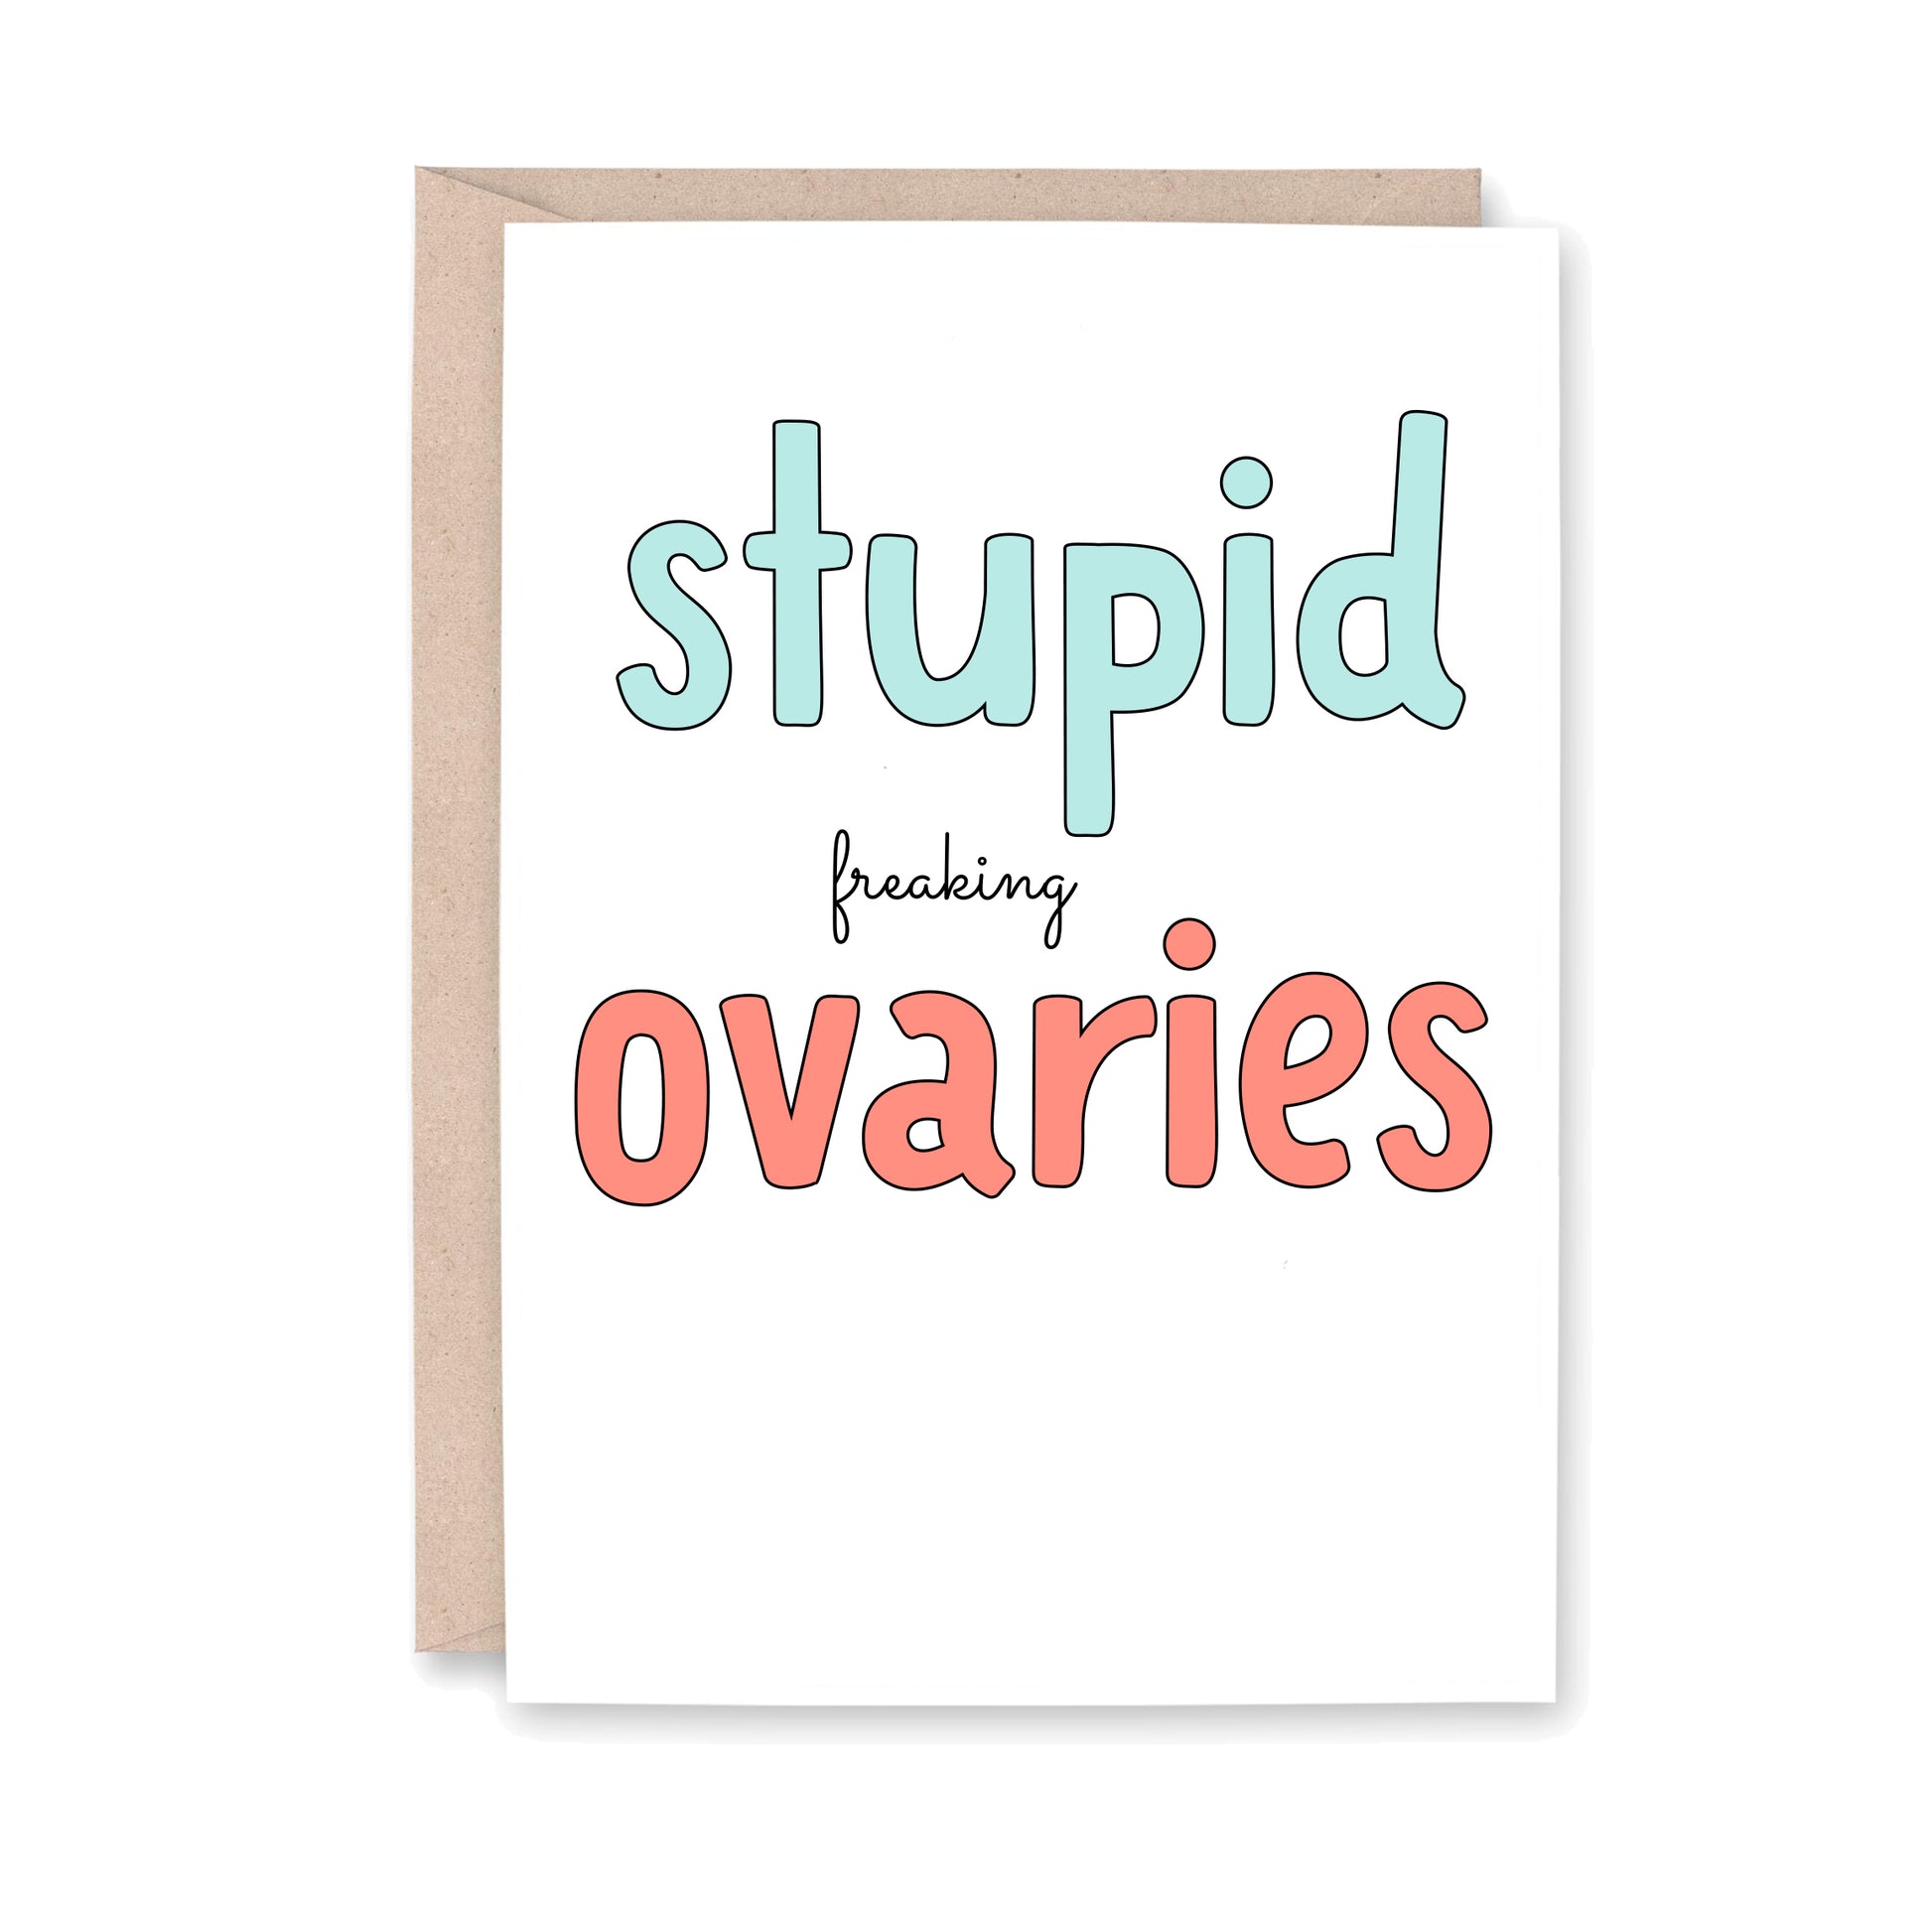 Greeting card that reads "stupid freaking ovaries"